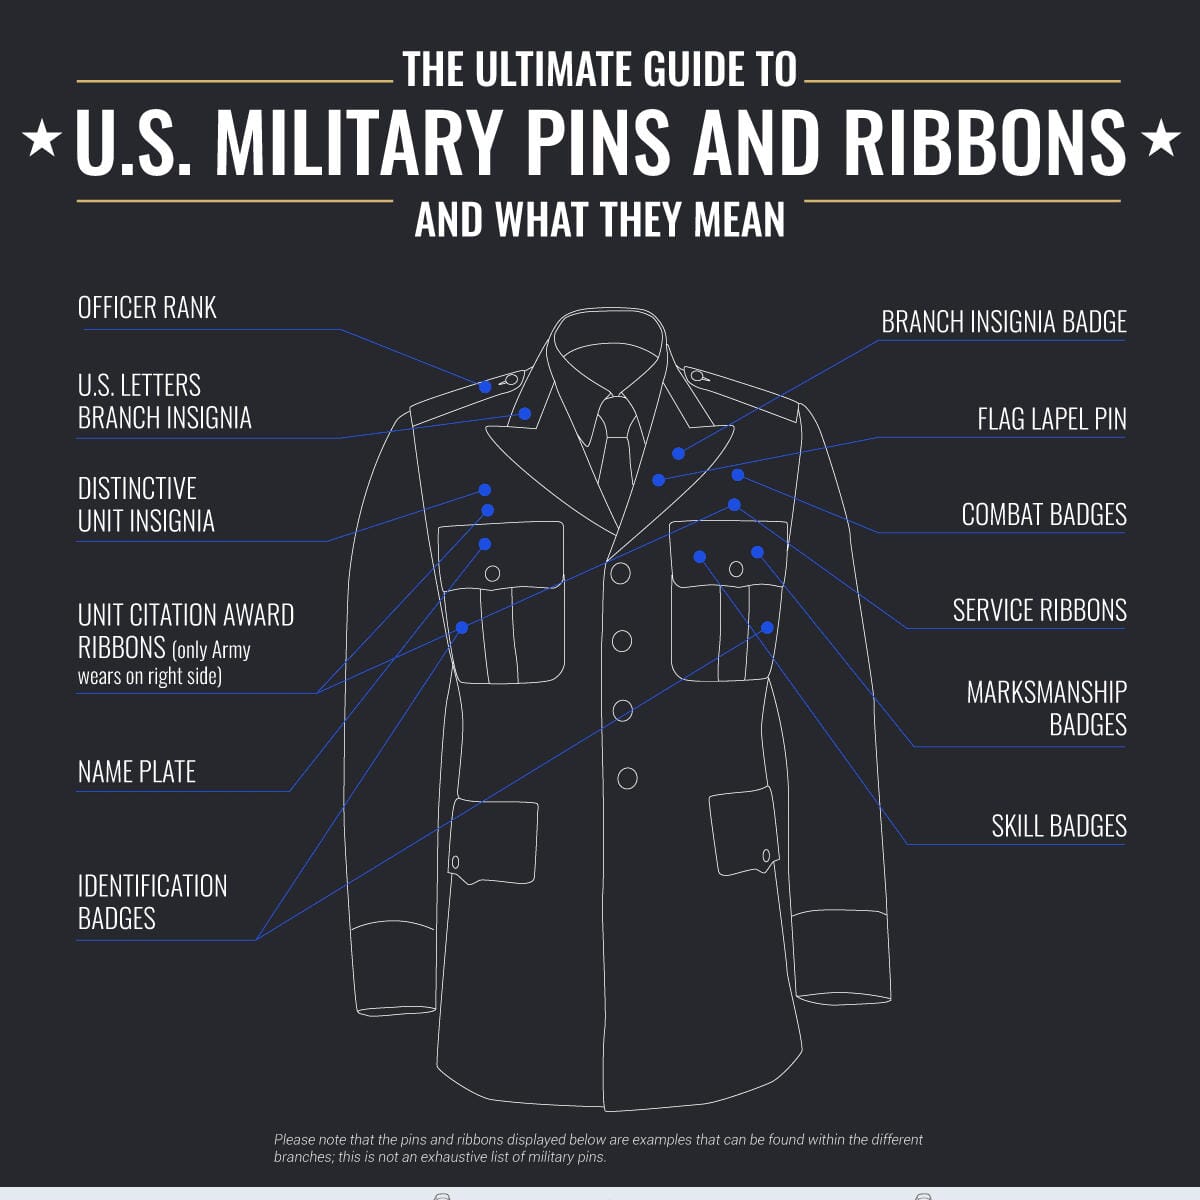 The Ultimate Guide to U.S. Military Pins and Ribbons and What They Mean